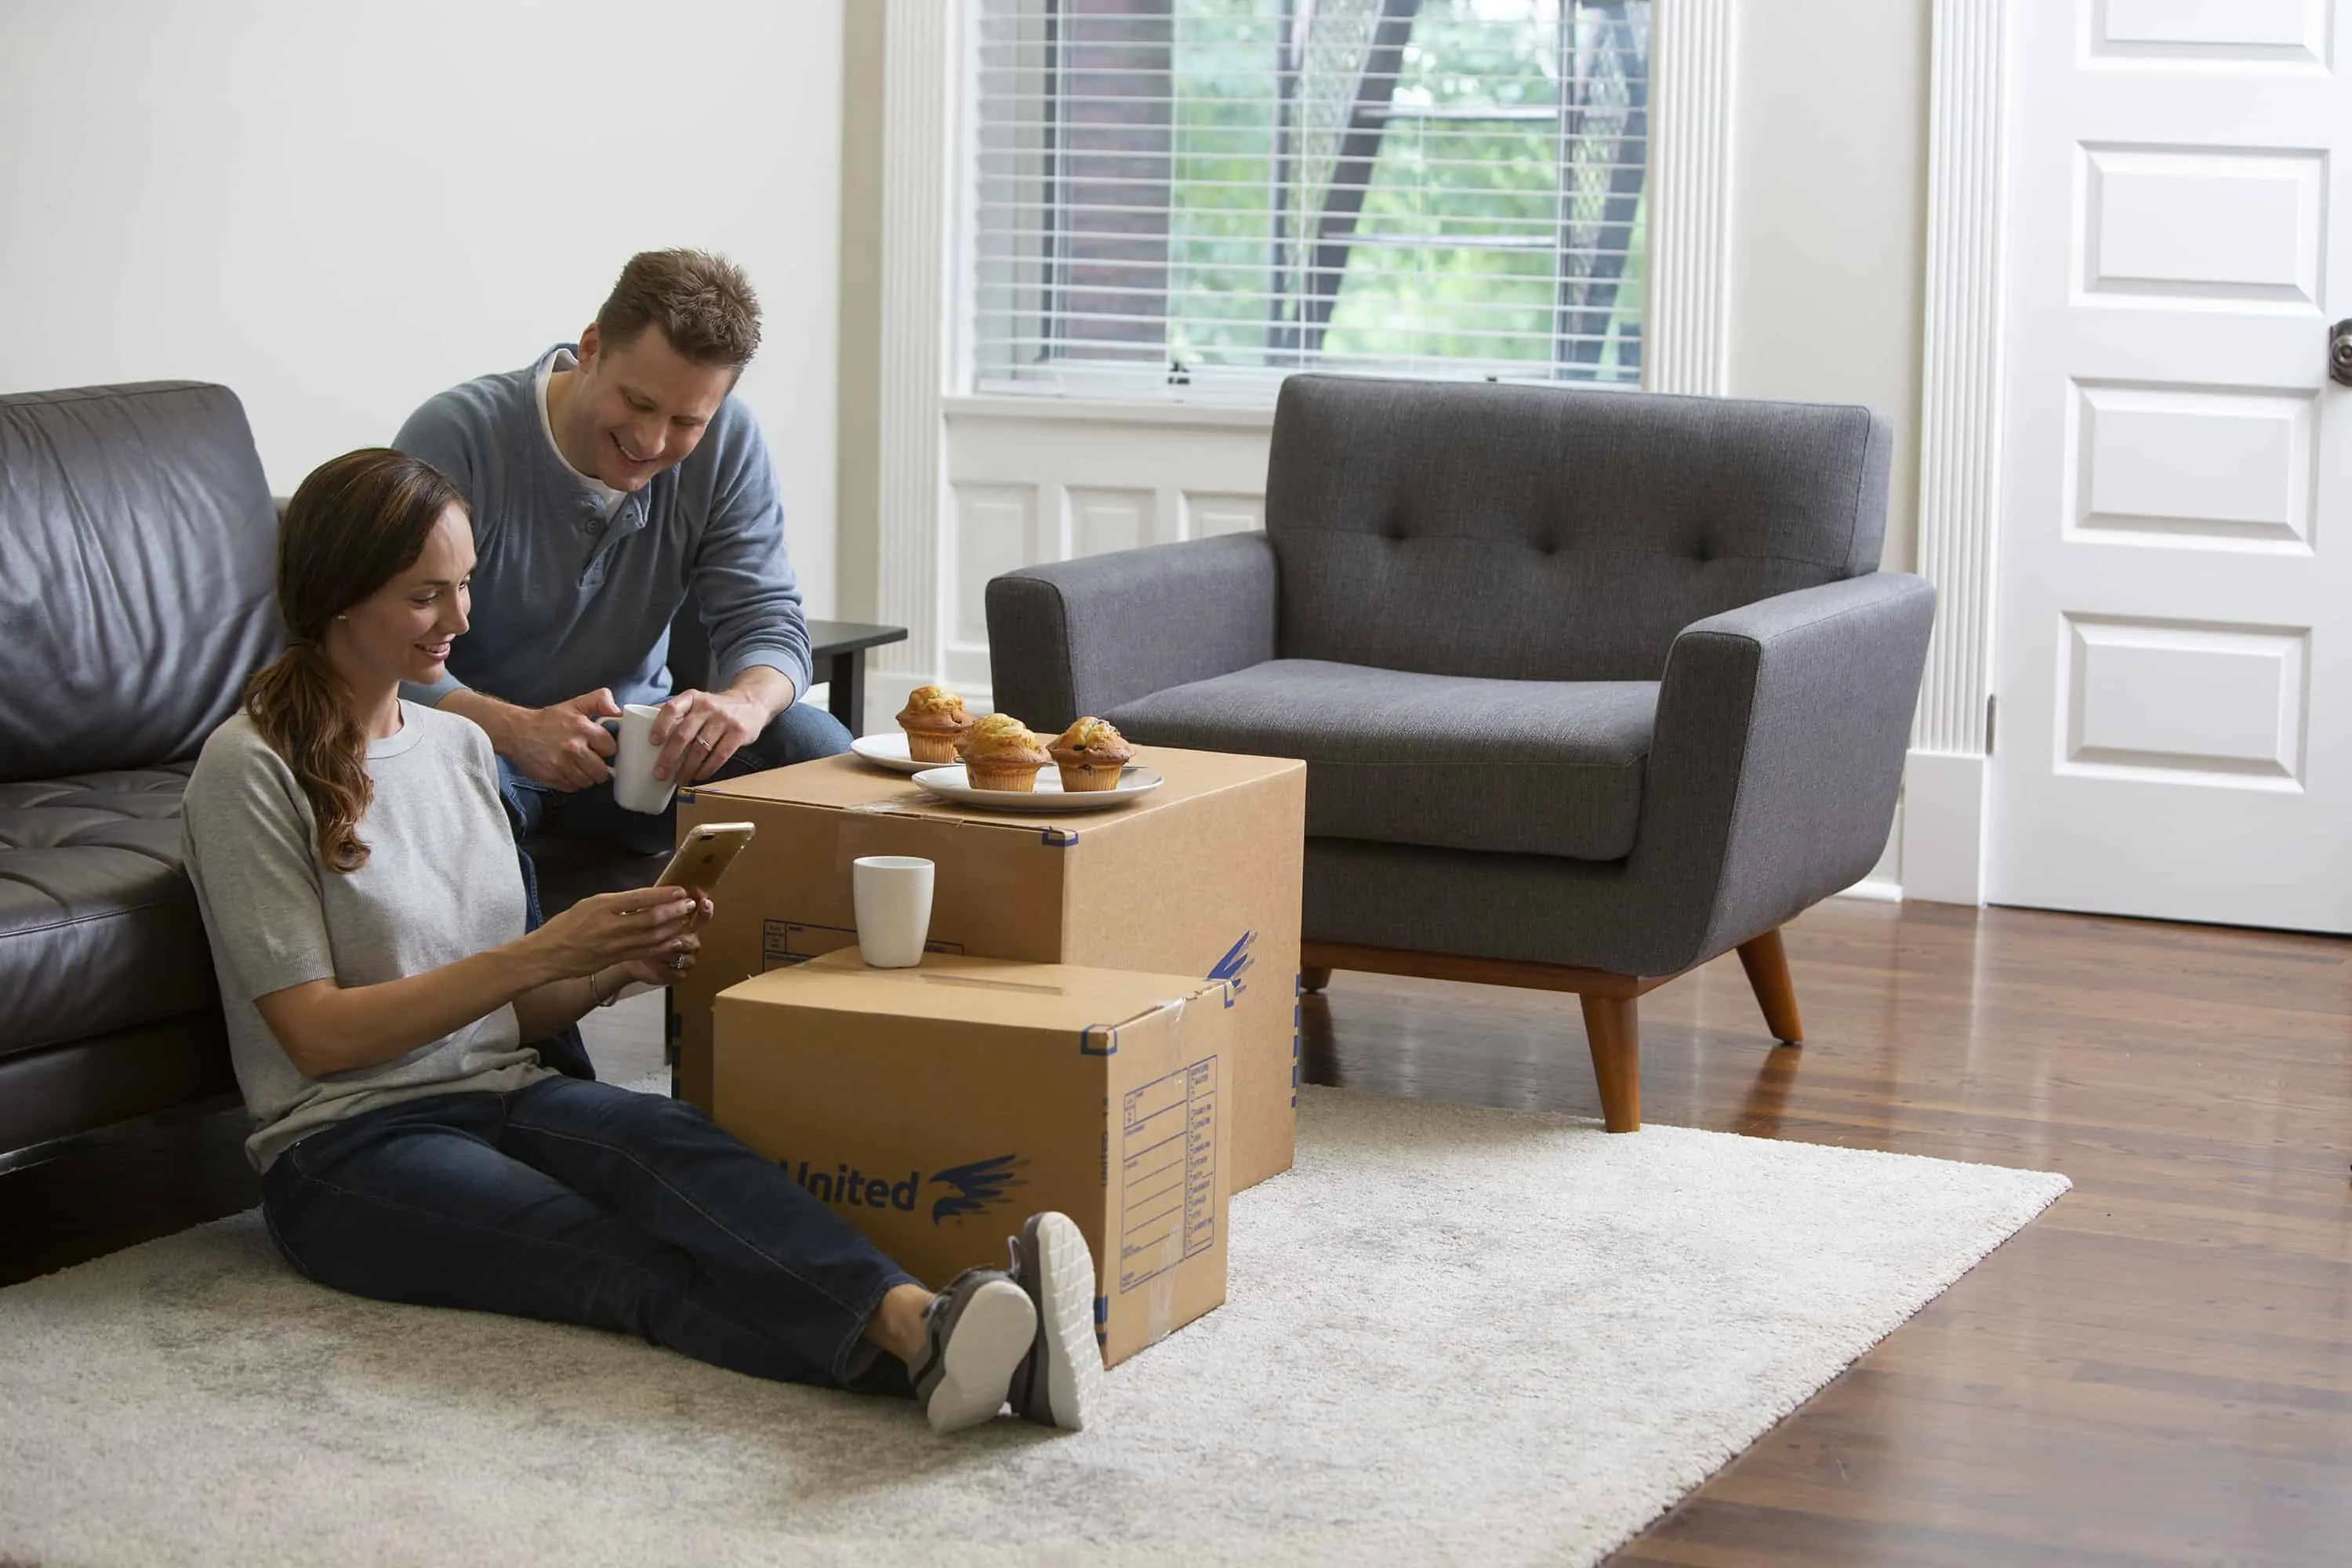 How to Pack the Living Room for Moving - young couple taking a break from packing their living room, using a box as a table for their breakfast muffins - United Van Lines